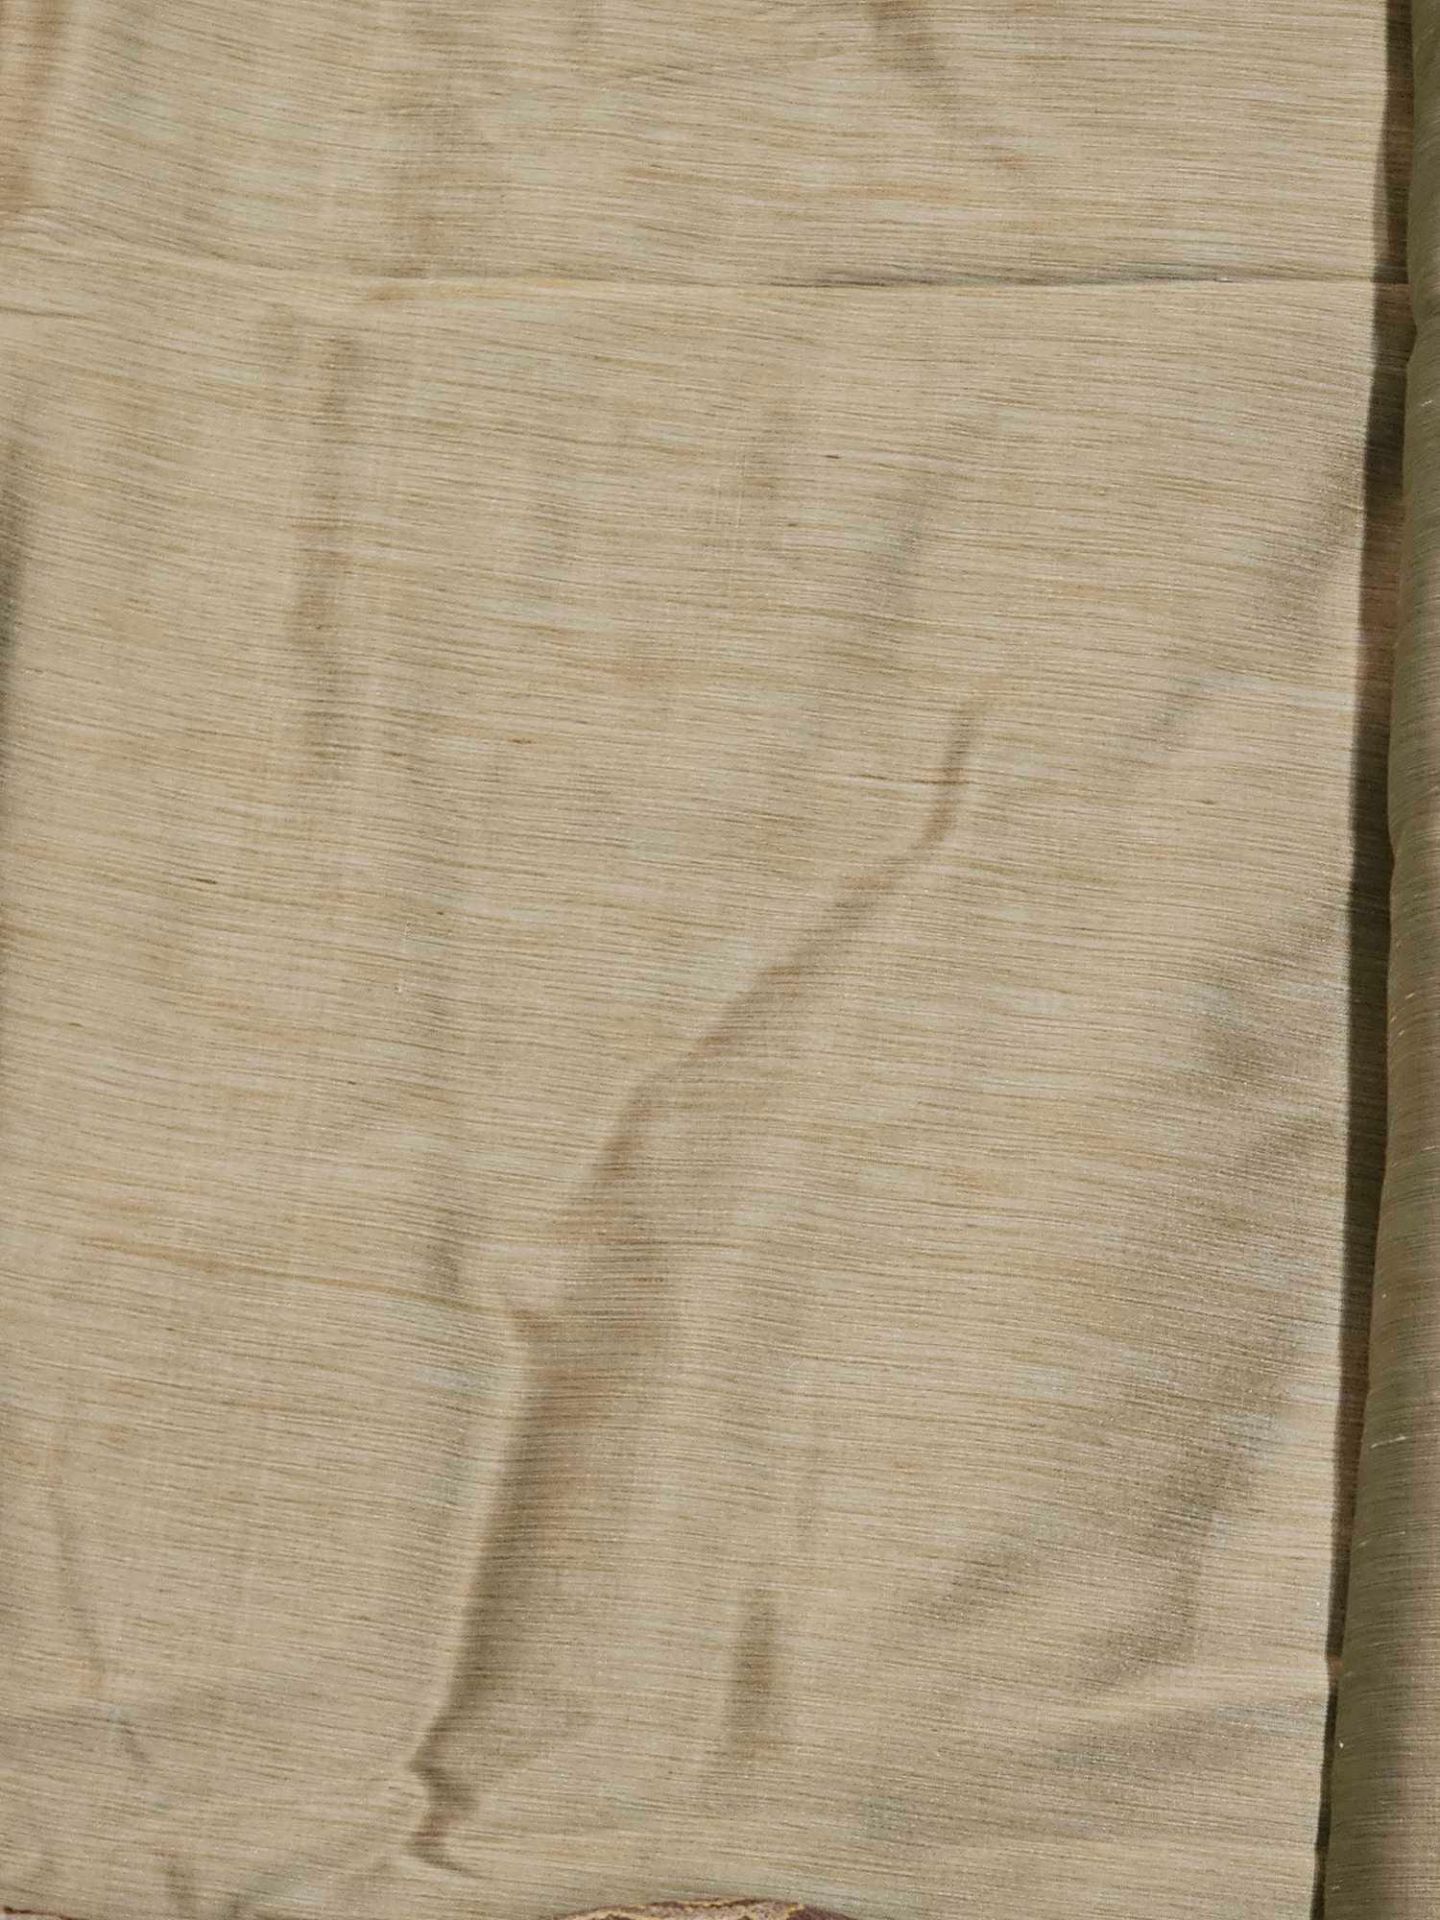 A Pair of Green Silk Drapes With Bronze And Cream Pattern Jabots 260 x 265 (Ref : Dorch D220) - Image 3 of 6